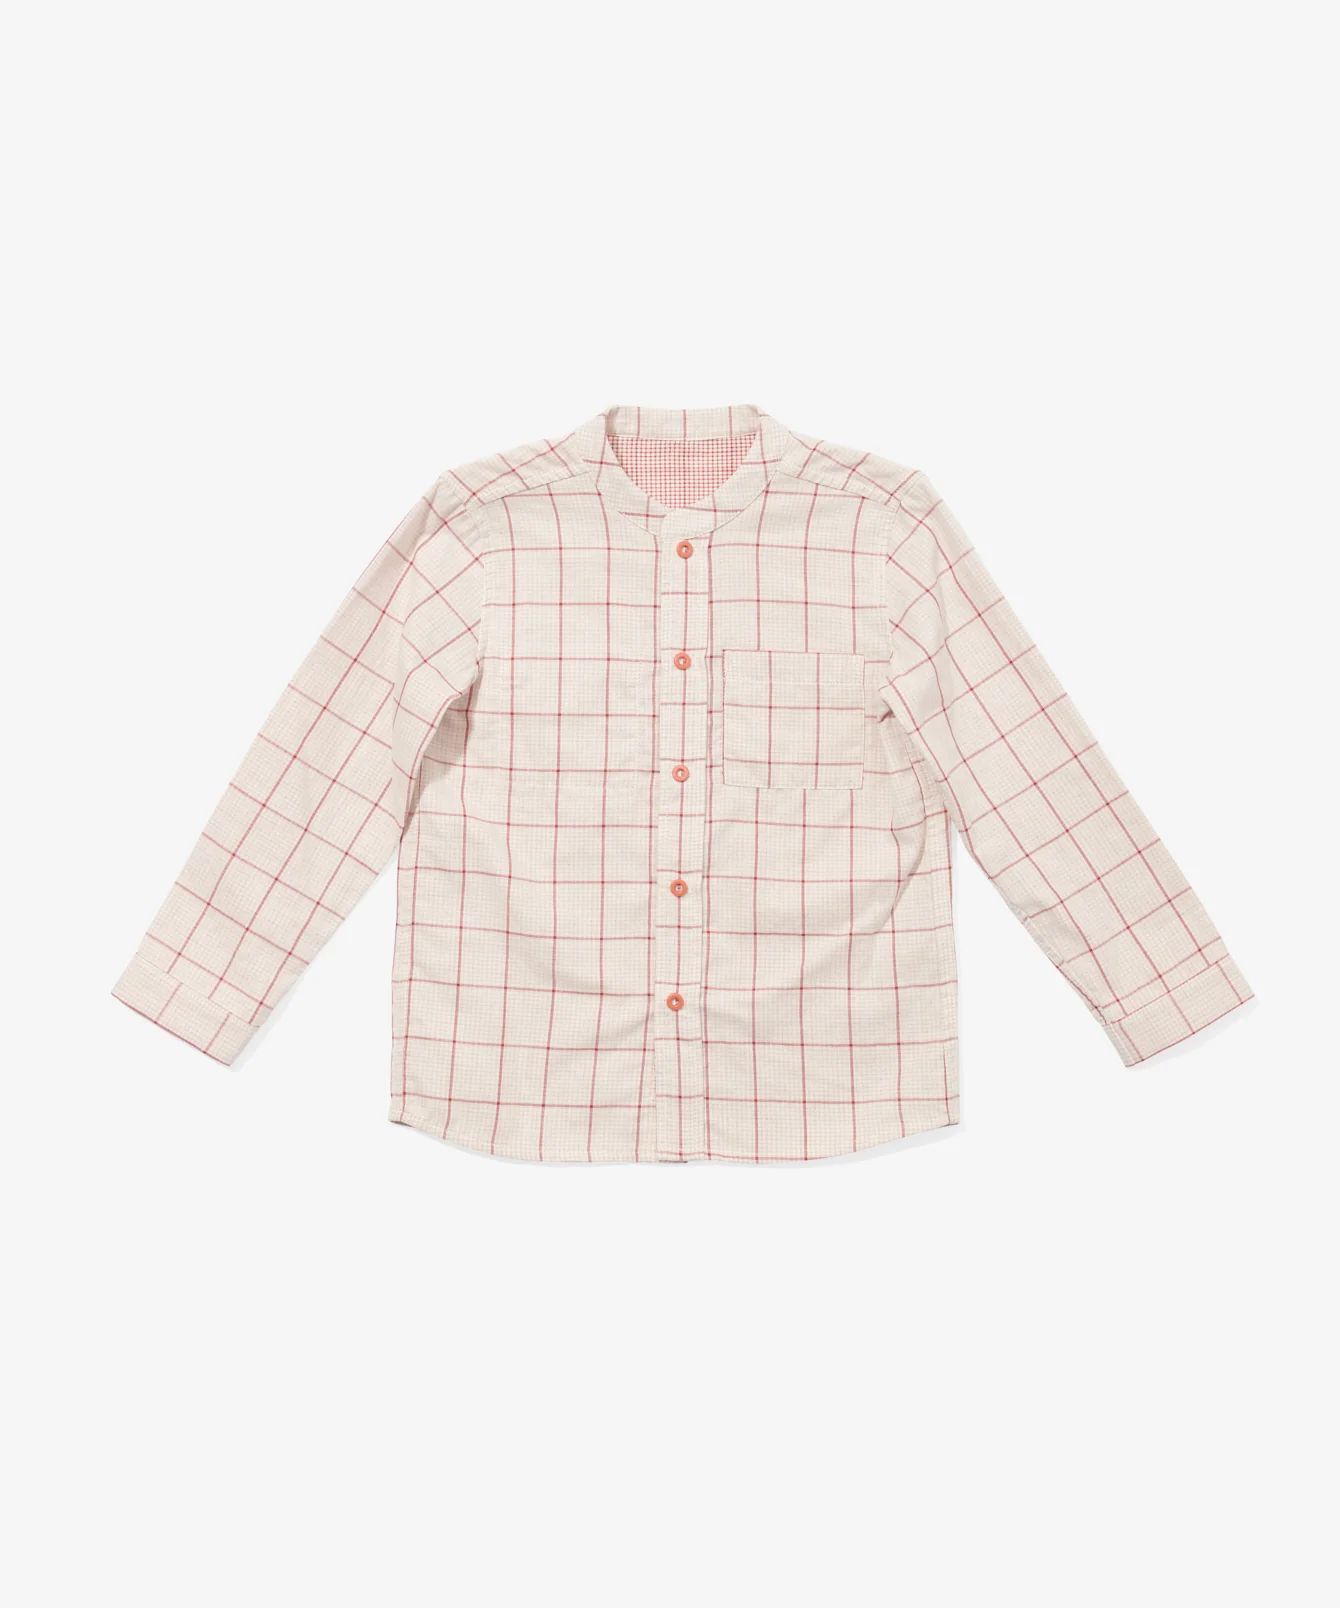 Children's Reversible Shirt | Oso and Me | Oso & Me